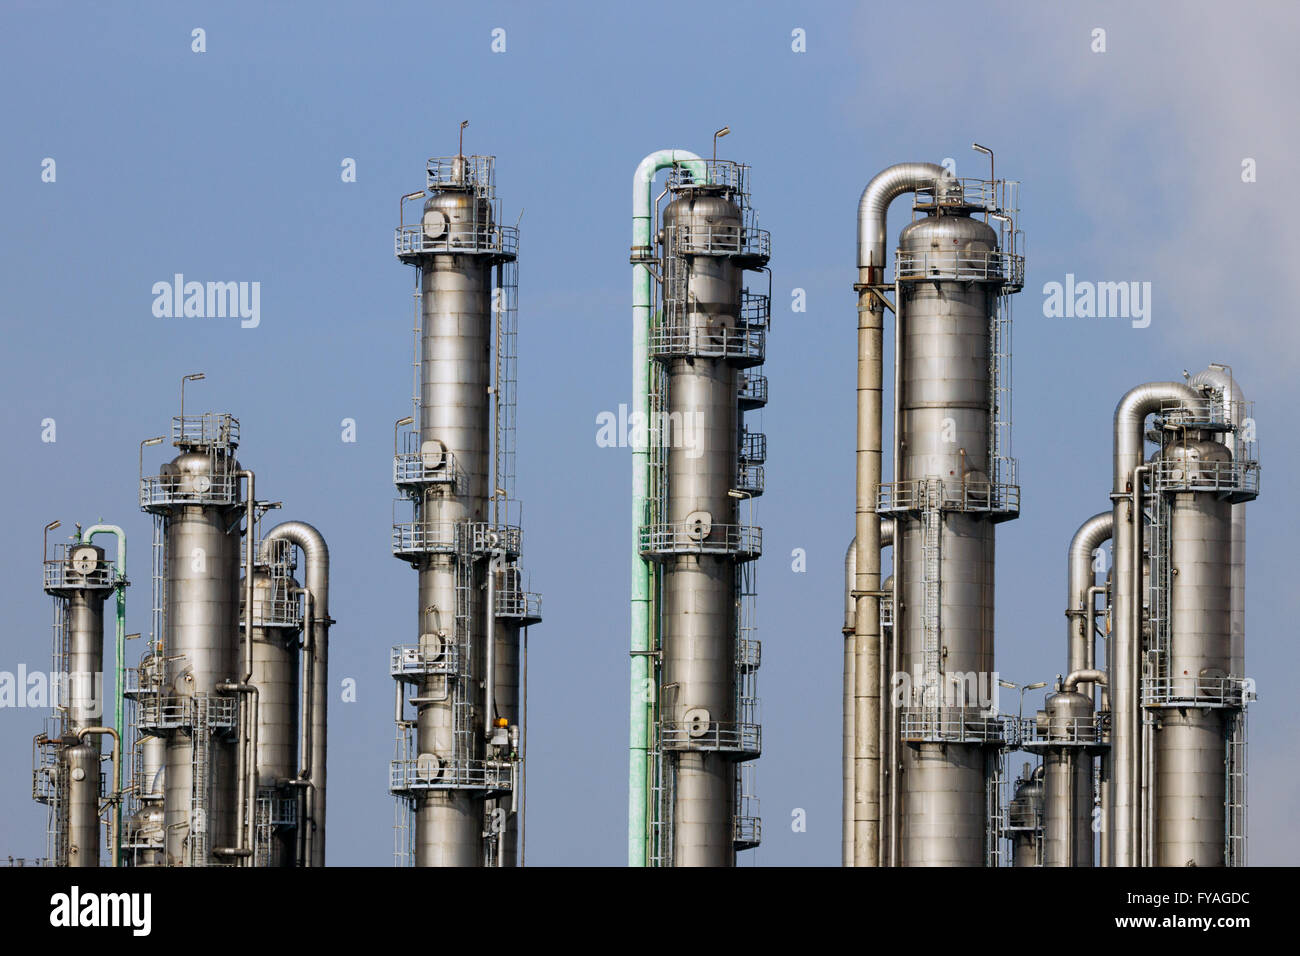 Pipelines of a oil and gas refinery industrial plant. Stock Photo